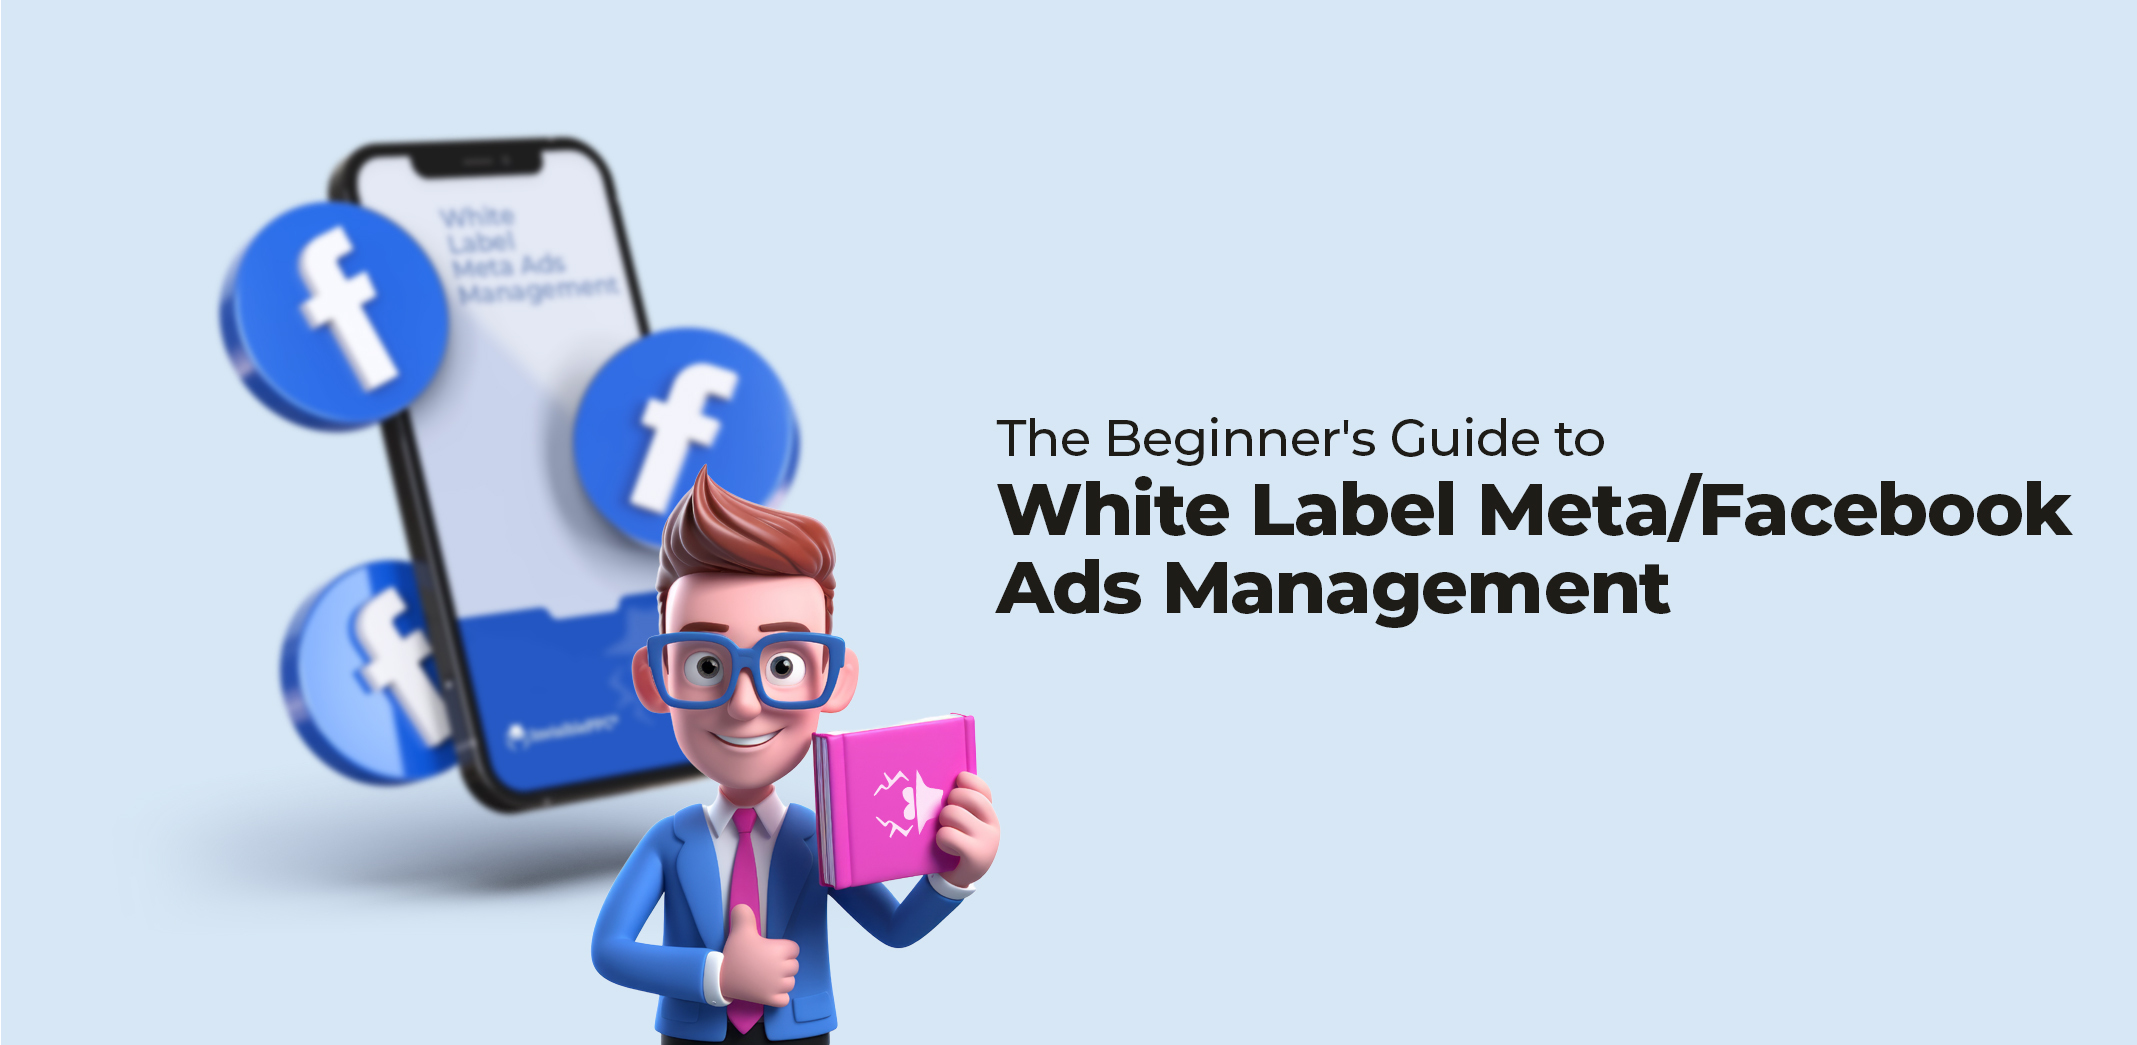 The Beginner’s Guide to White Label Meta/Facebook Ads Management